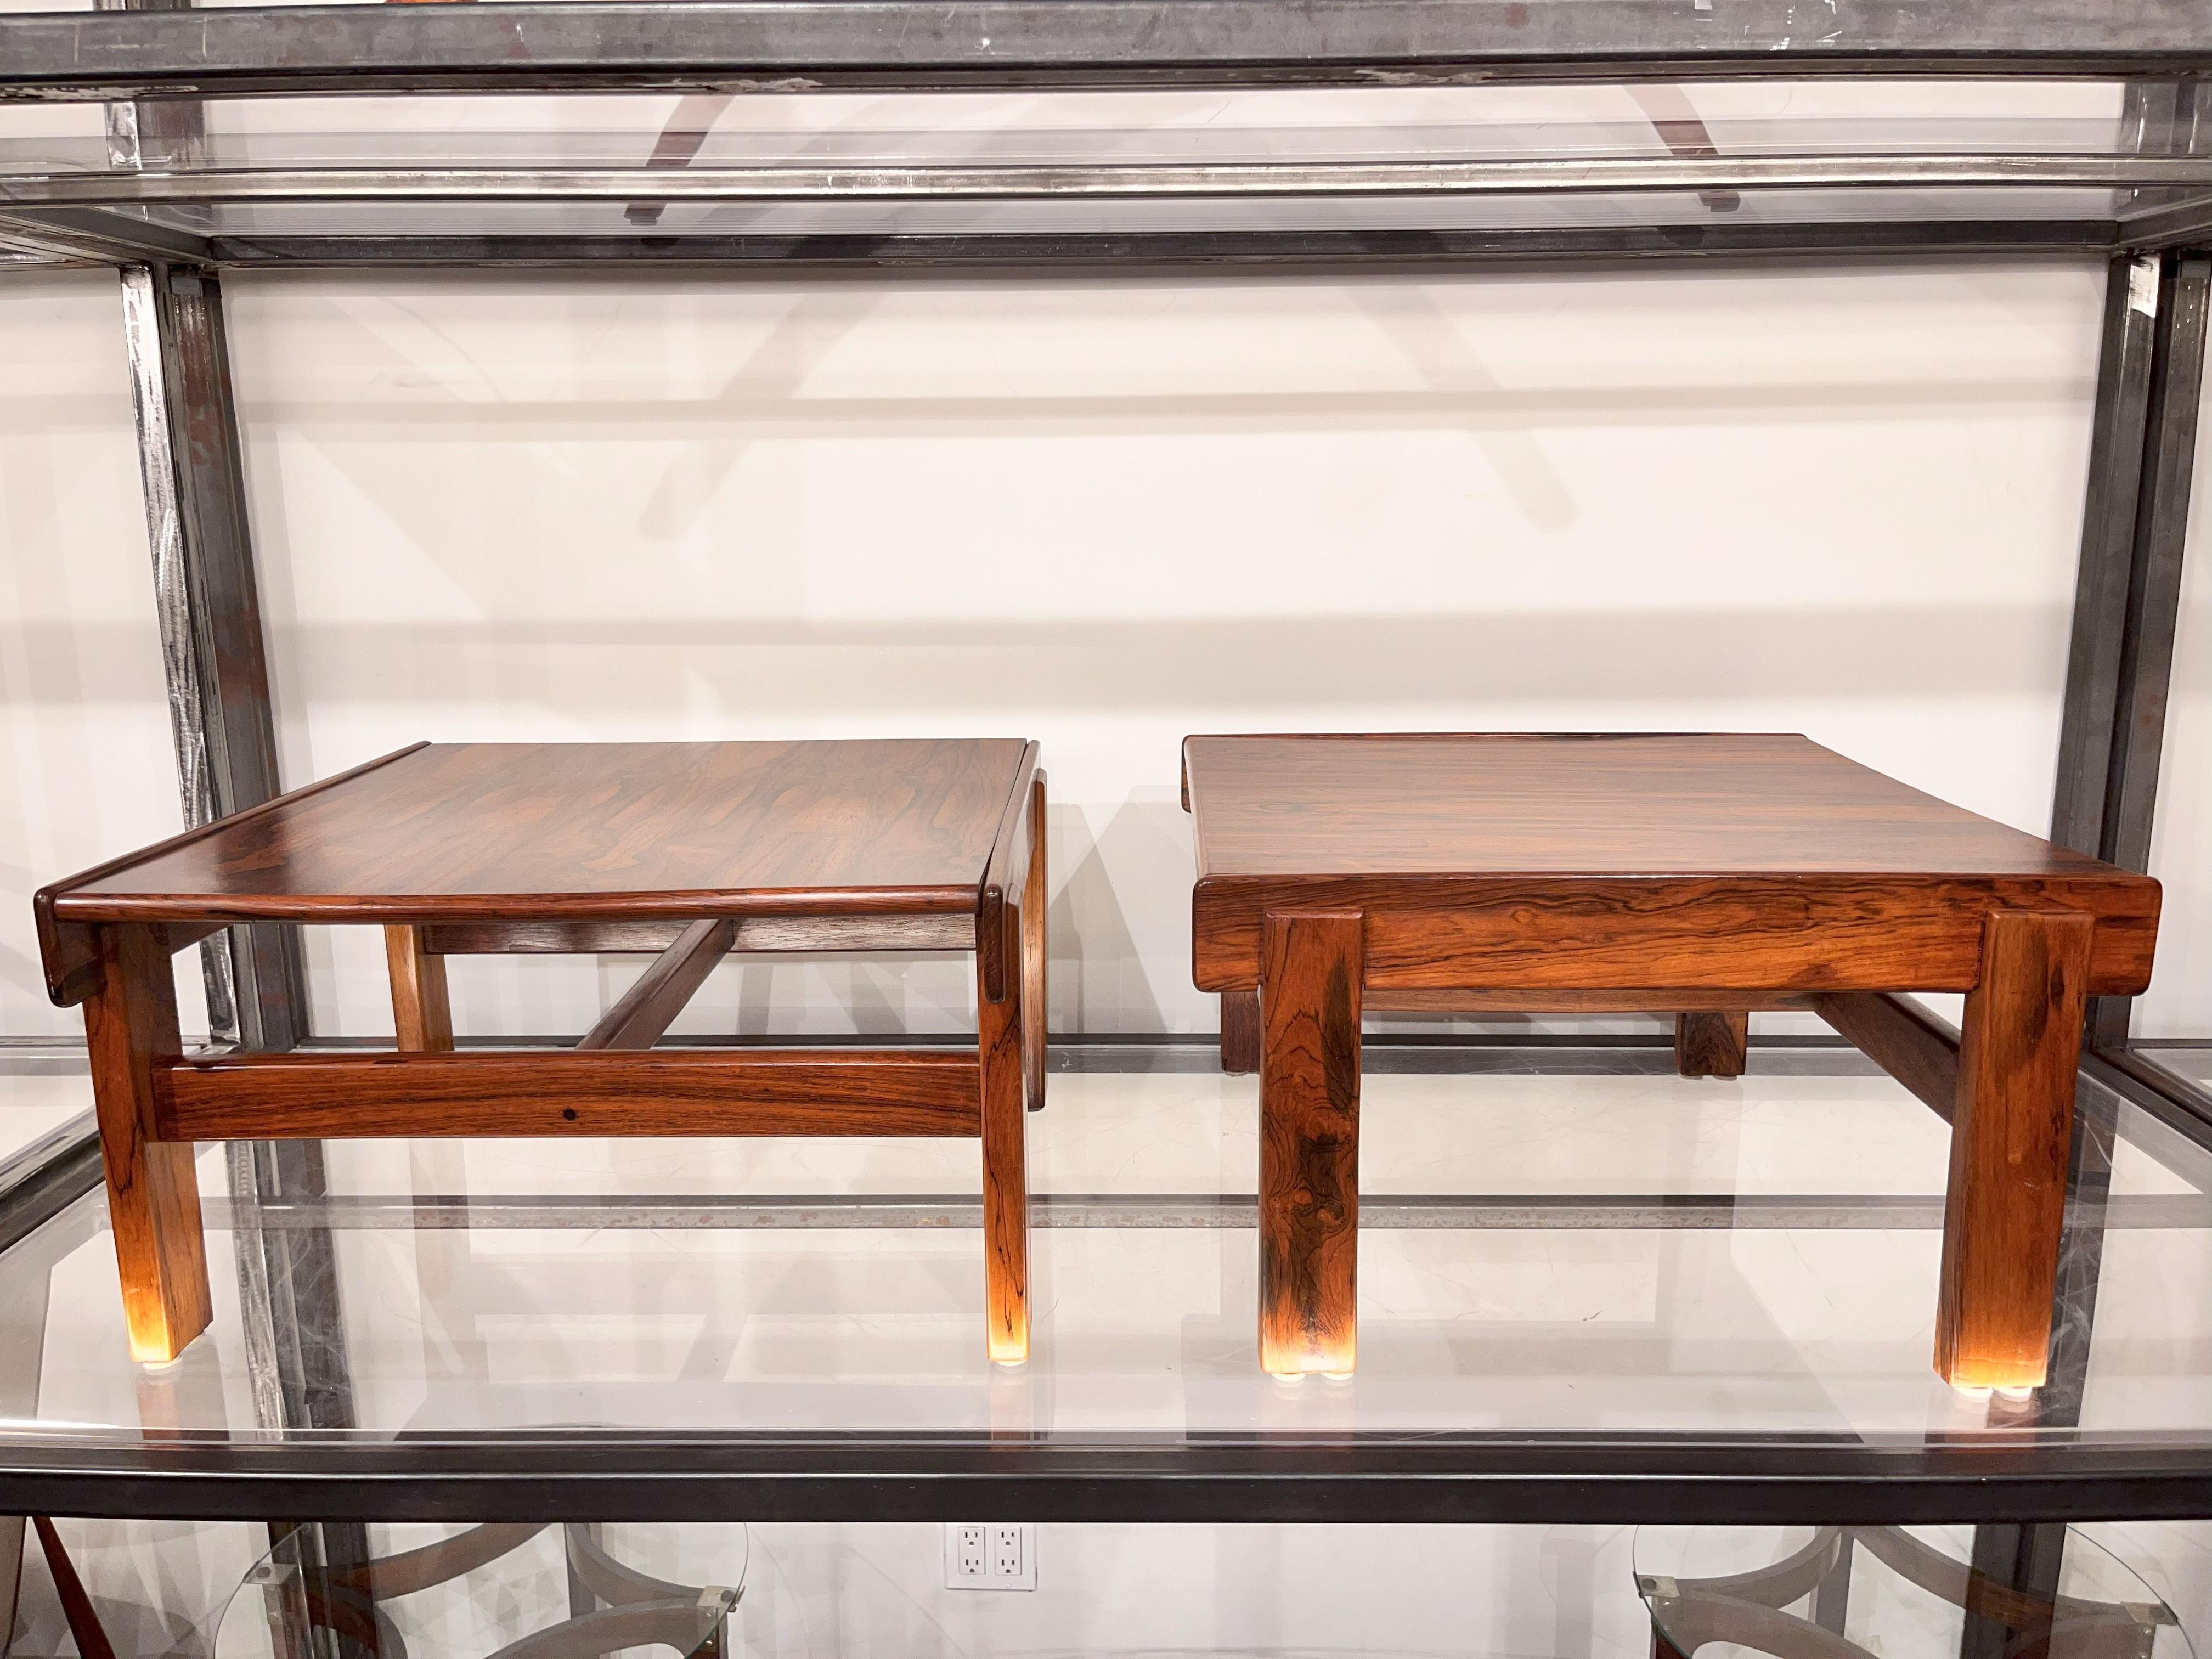 Available today, this Brazilian modern side table set in Hardwood designed by Jean Gillon in the 1960’s is nothing less than spectacular.

Sizes:
- Side Tables: H14.6, W25.6, D25.6 (in) H37, W65, D65 (cm)

The entire set is made in Brazilian